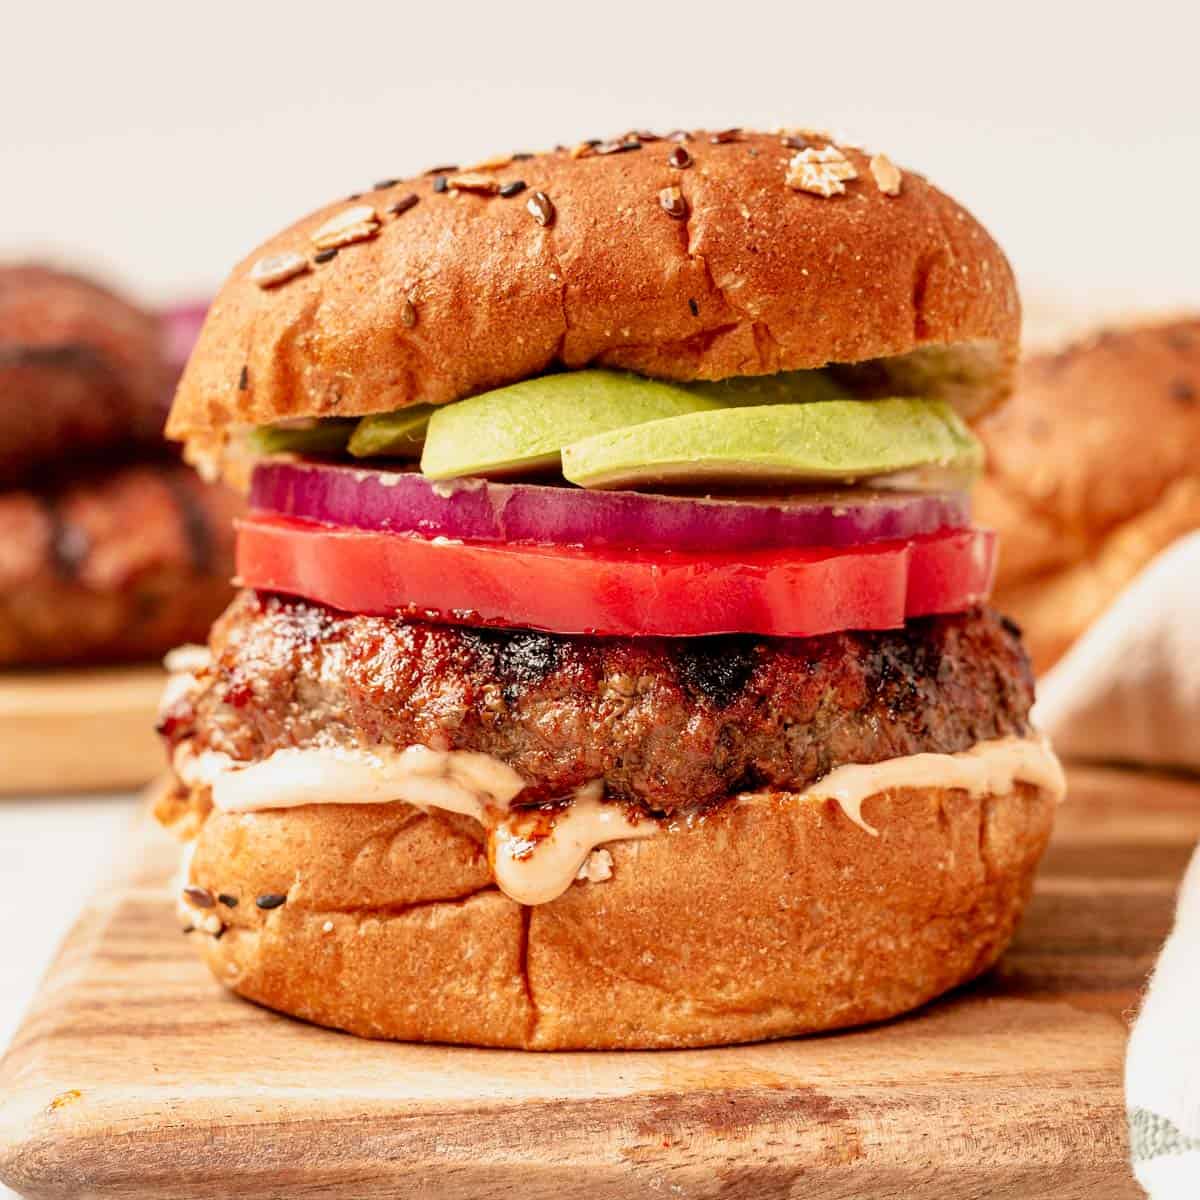 How to Make Classic Hamburgers on a Charcoal Grill